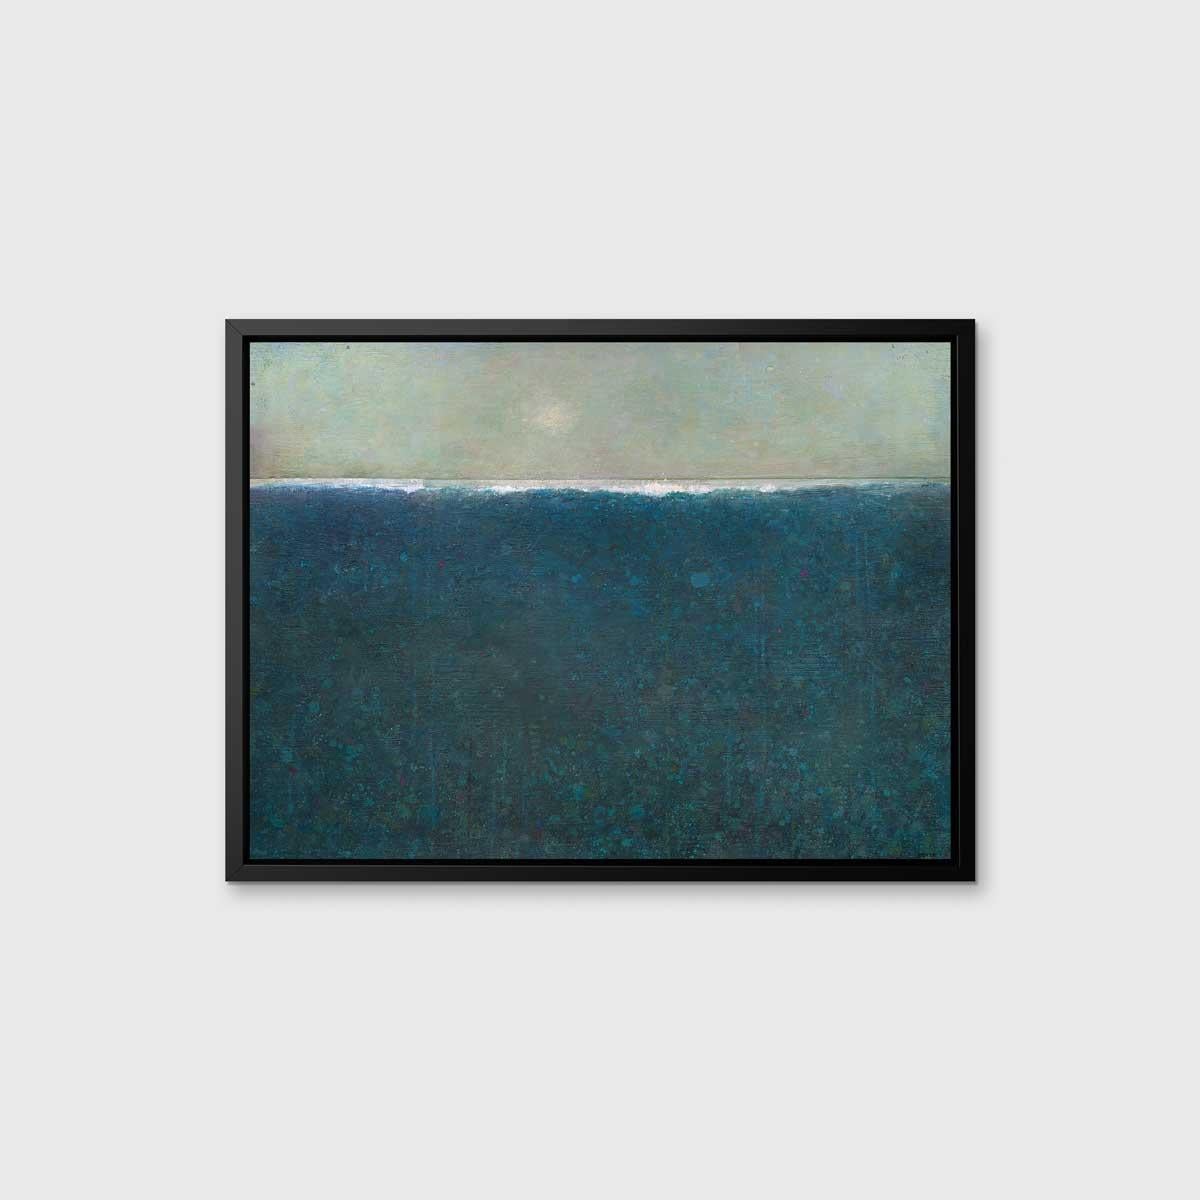 This abstract landscape limited edition print by Elwood Howell features the artist's signature high horizon line in white. Beneath the line is a textured deep blue that is composed of small shapes and layers. Above the horizon is a pale green sky